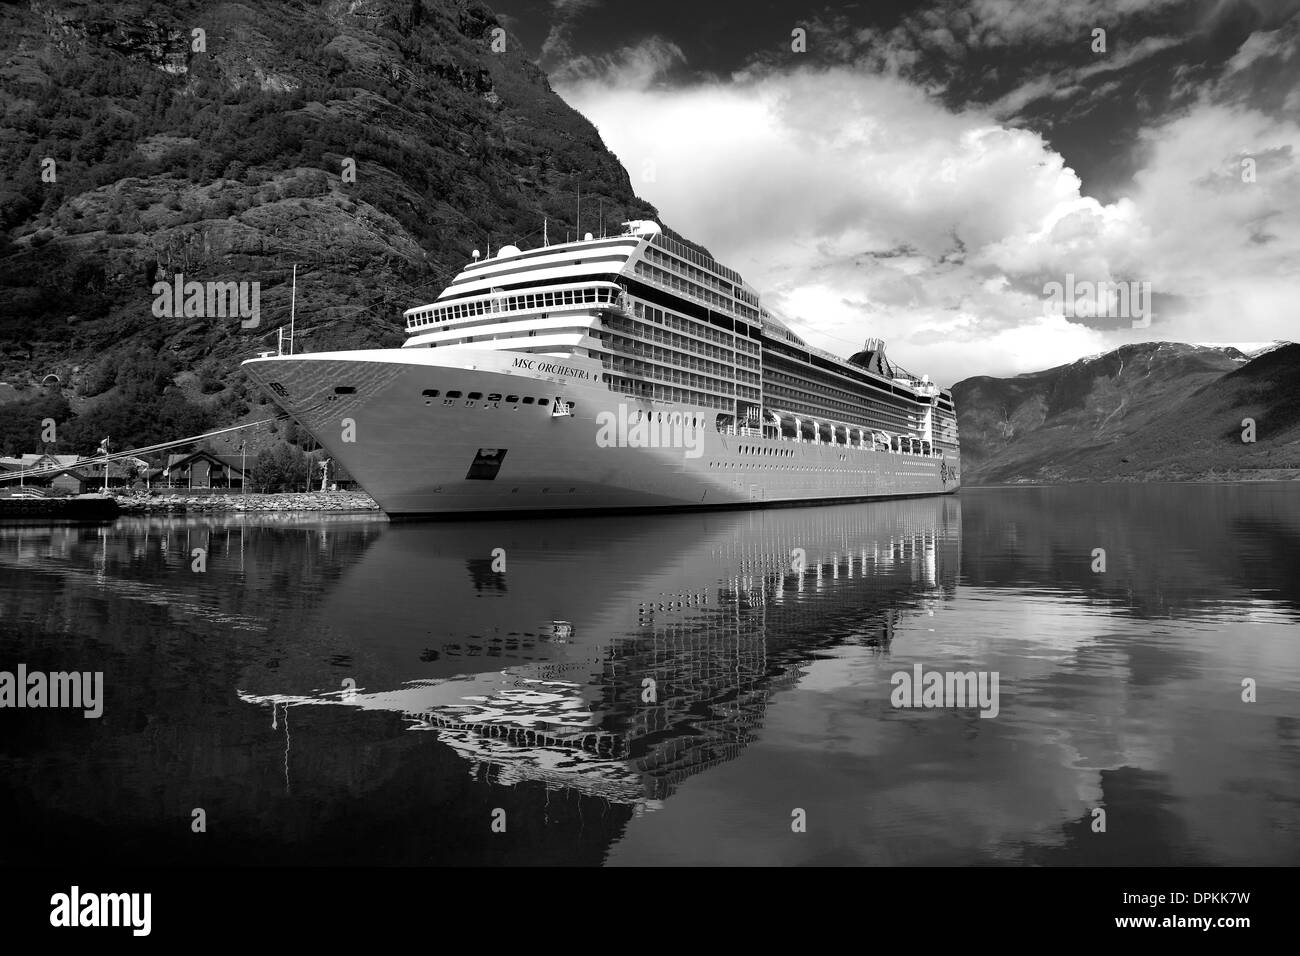 Cruise ship MSC Orchestra, harbour at the town of Flam, Aurlandsfjorden Fjord, Norway, Scandinavia, Europe. Stock Photo